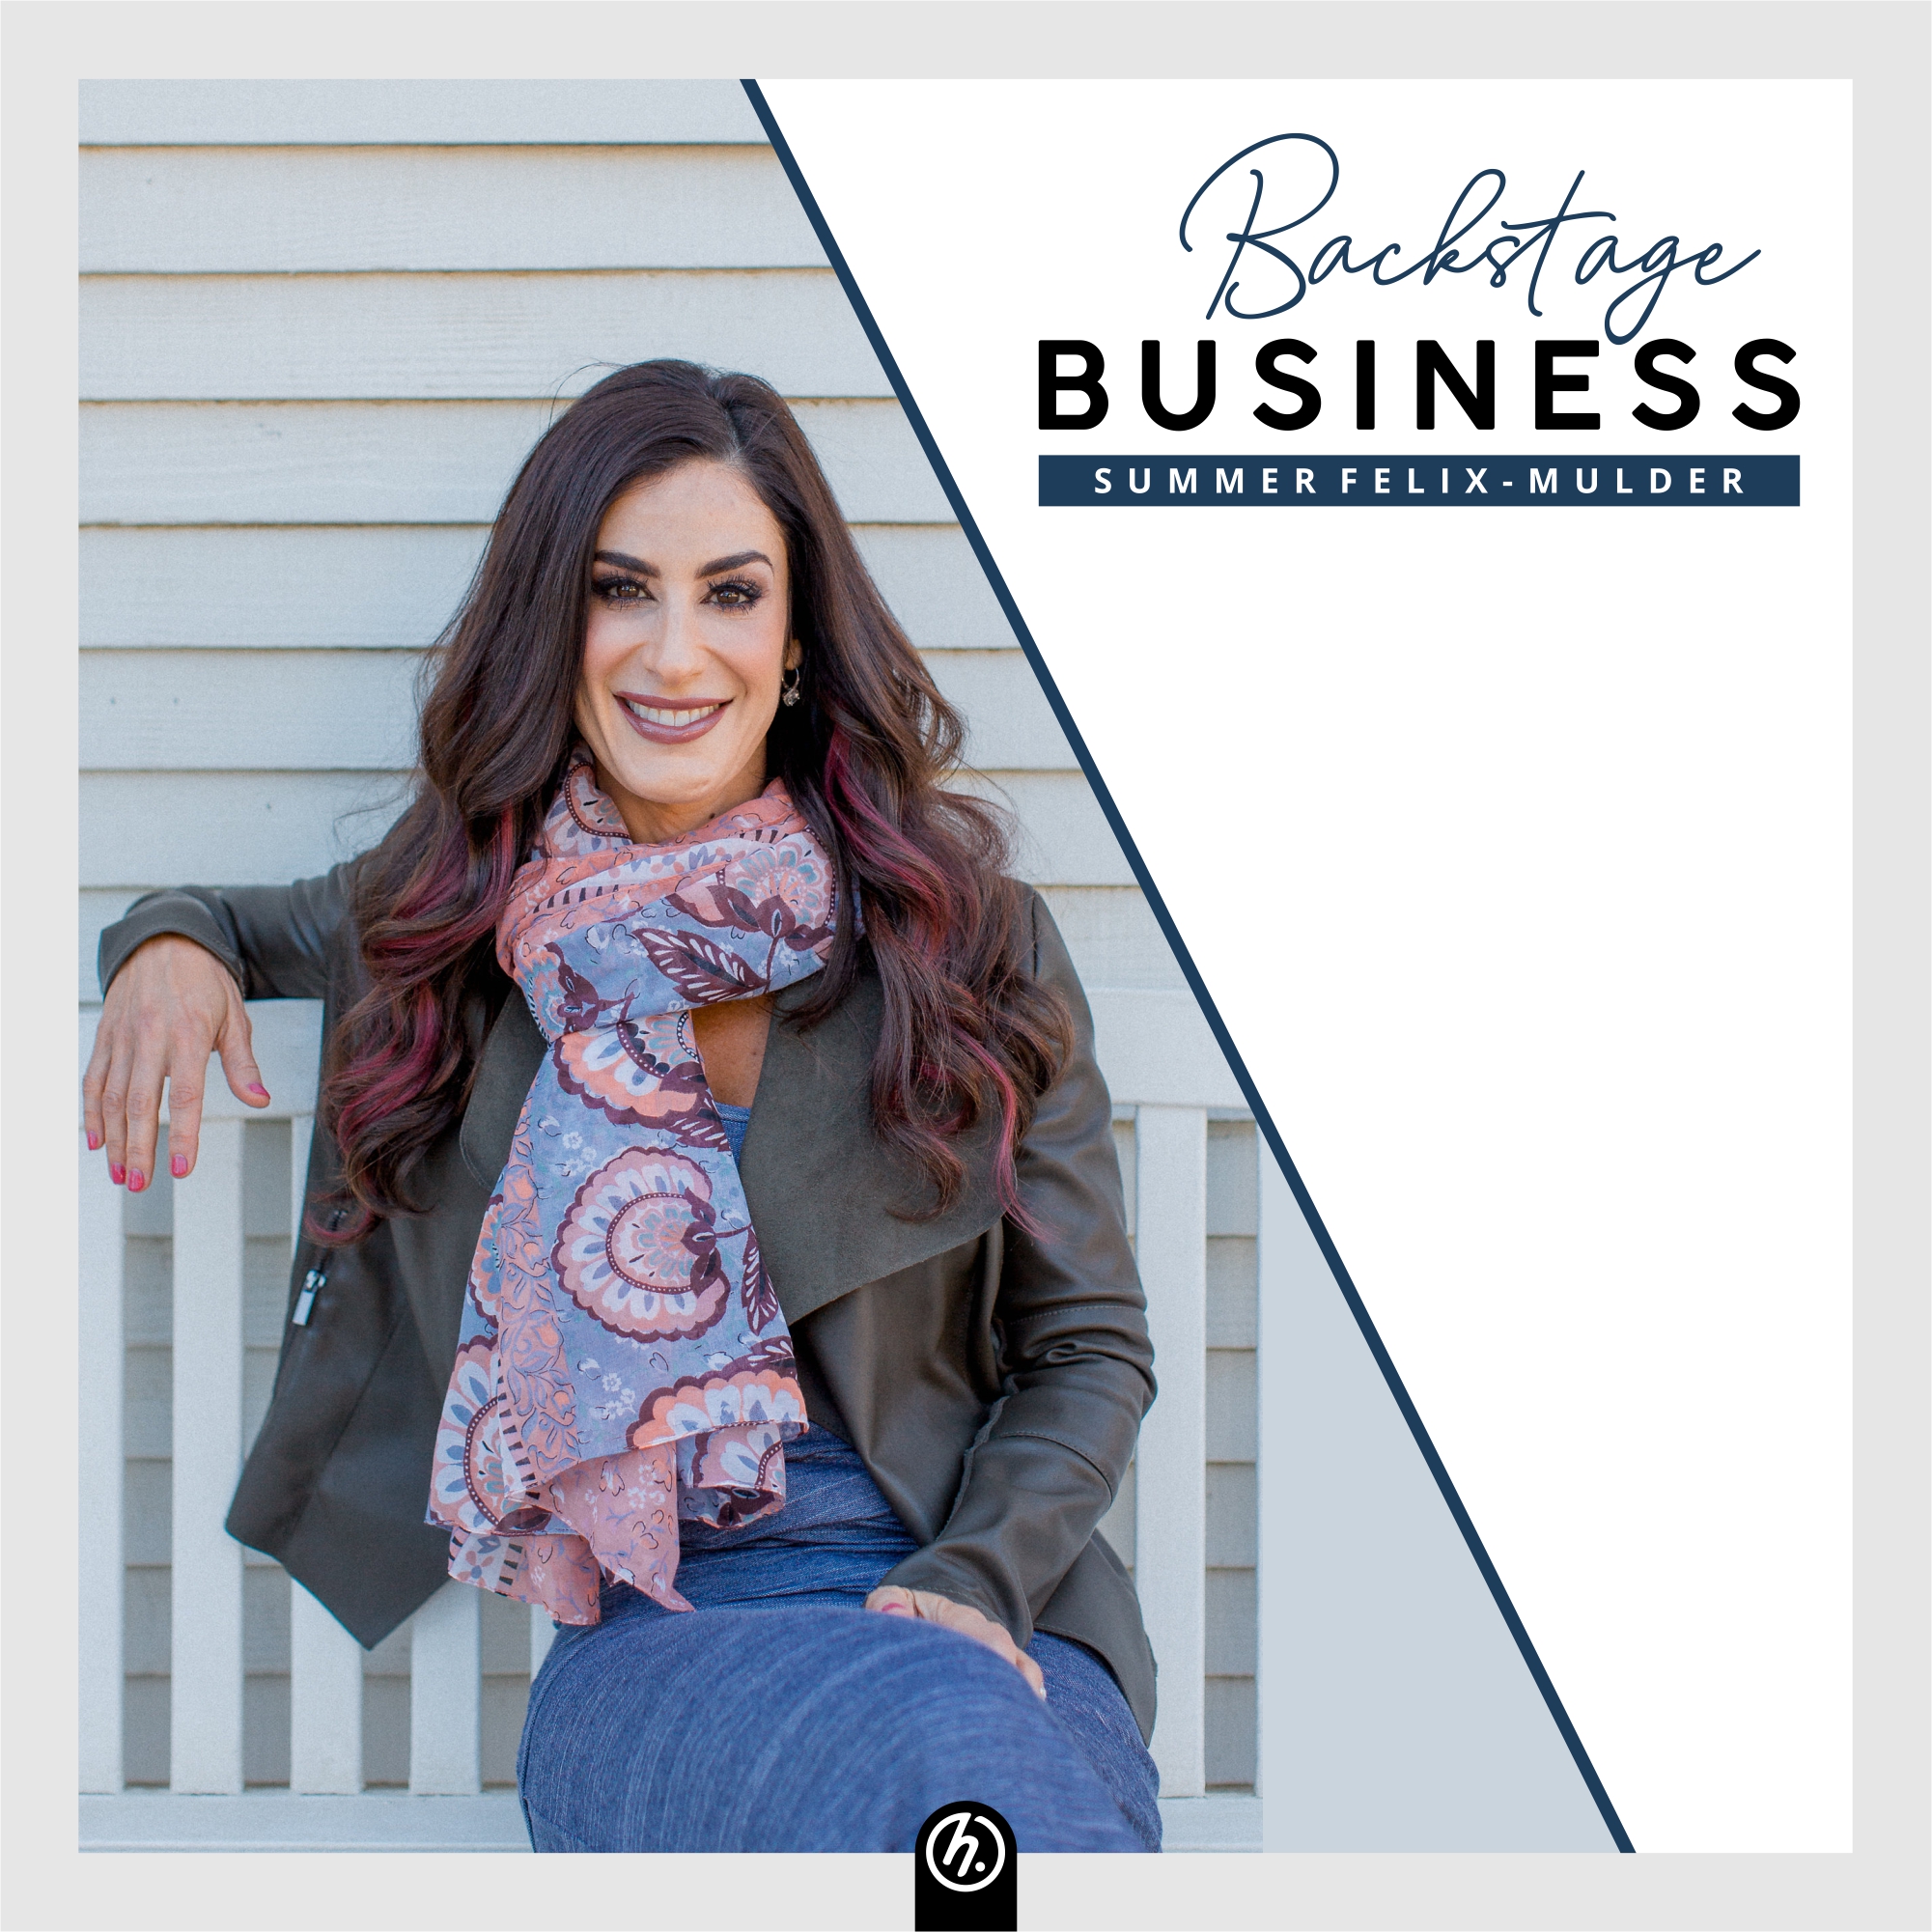 Attracting New Business Through Podcasting with Kristin Molenaar - Backstage Business #72